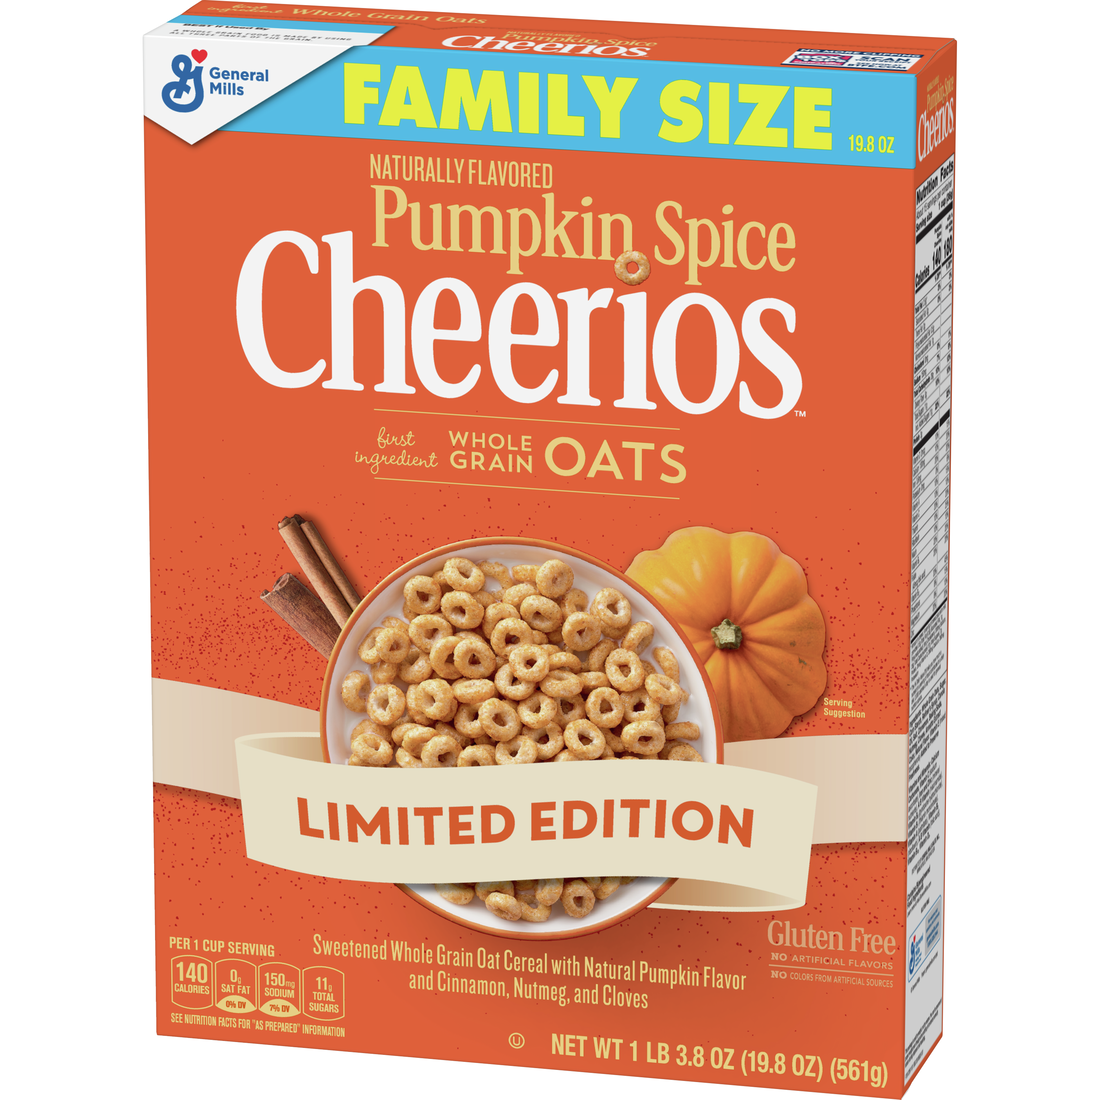 General Mills, Breakfast Cereal, Pumpkin Spice Cheerios, Gluten Free, Family Size, 19.8oz Box - image 4 of 11